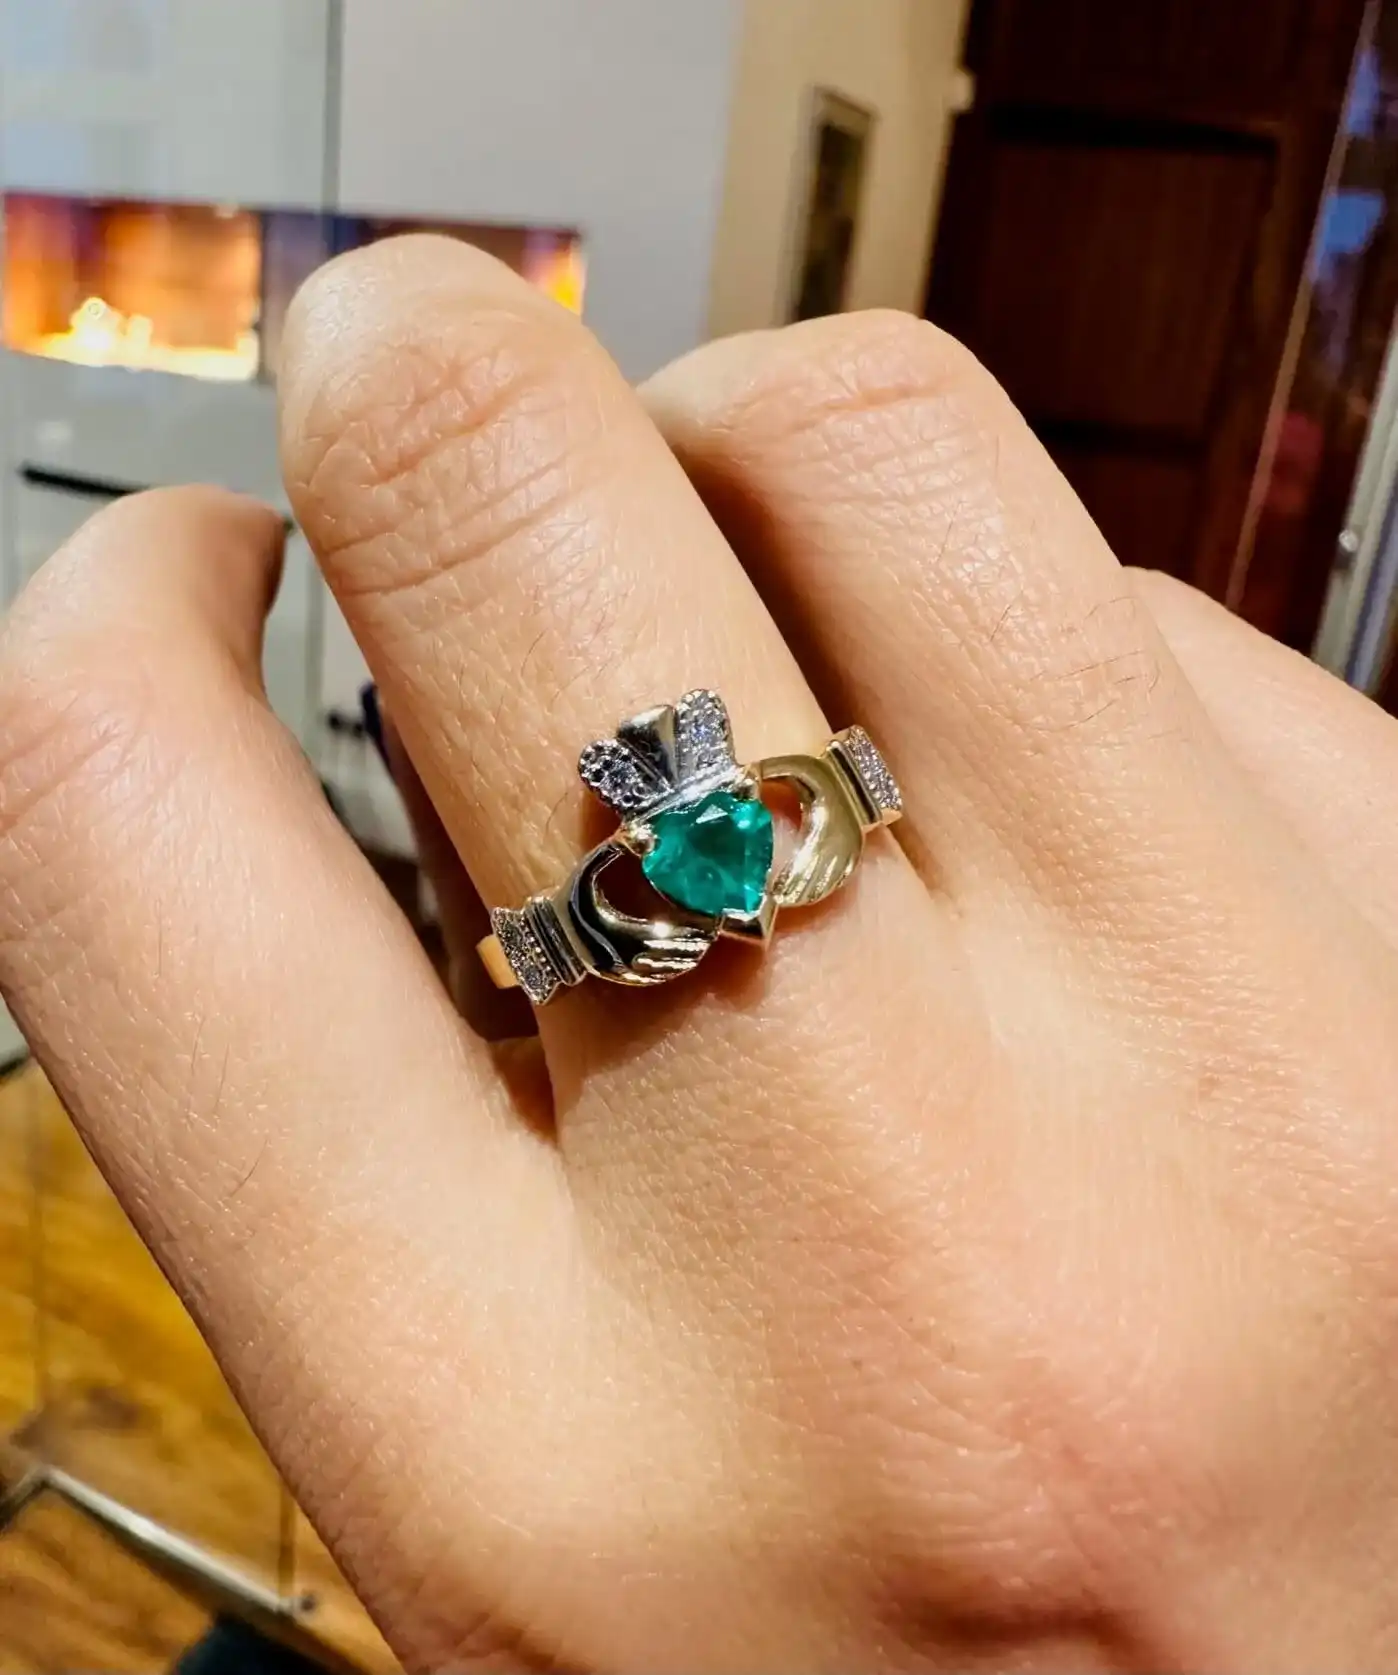 Claddagh Ring White Gold Emerald On Finger...